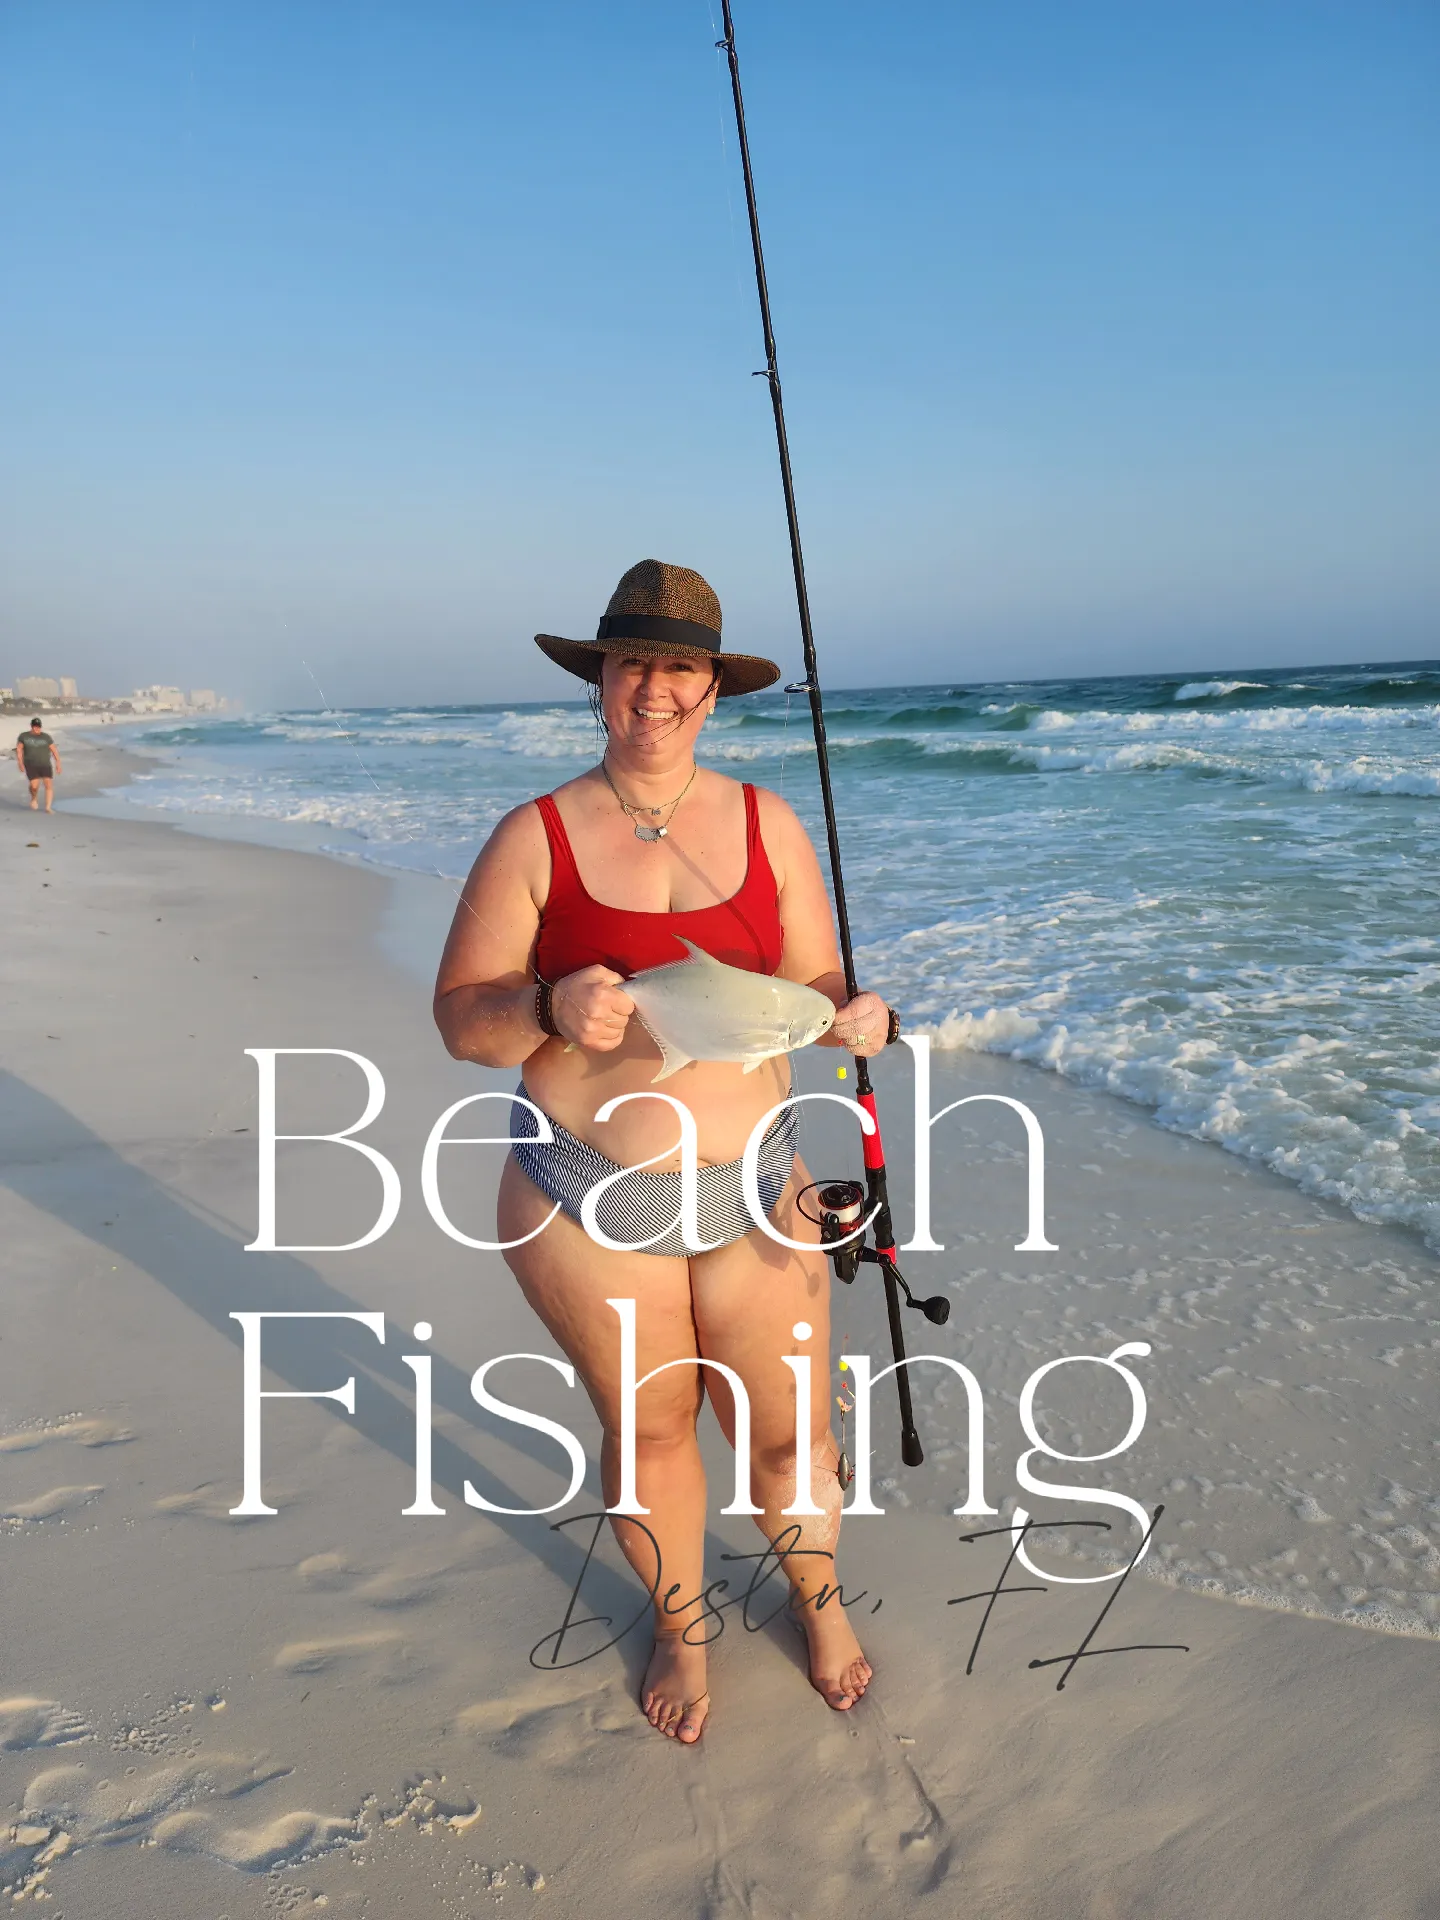 Fishing on the Beach in Destin, Florida, Gallery posted by Dina Aasen